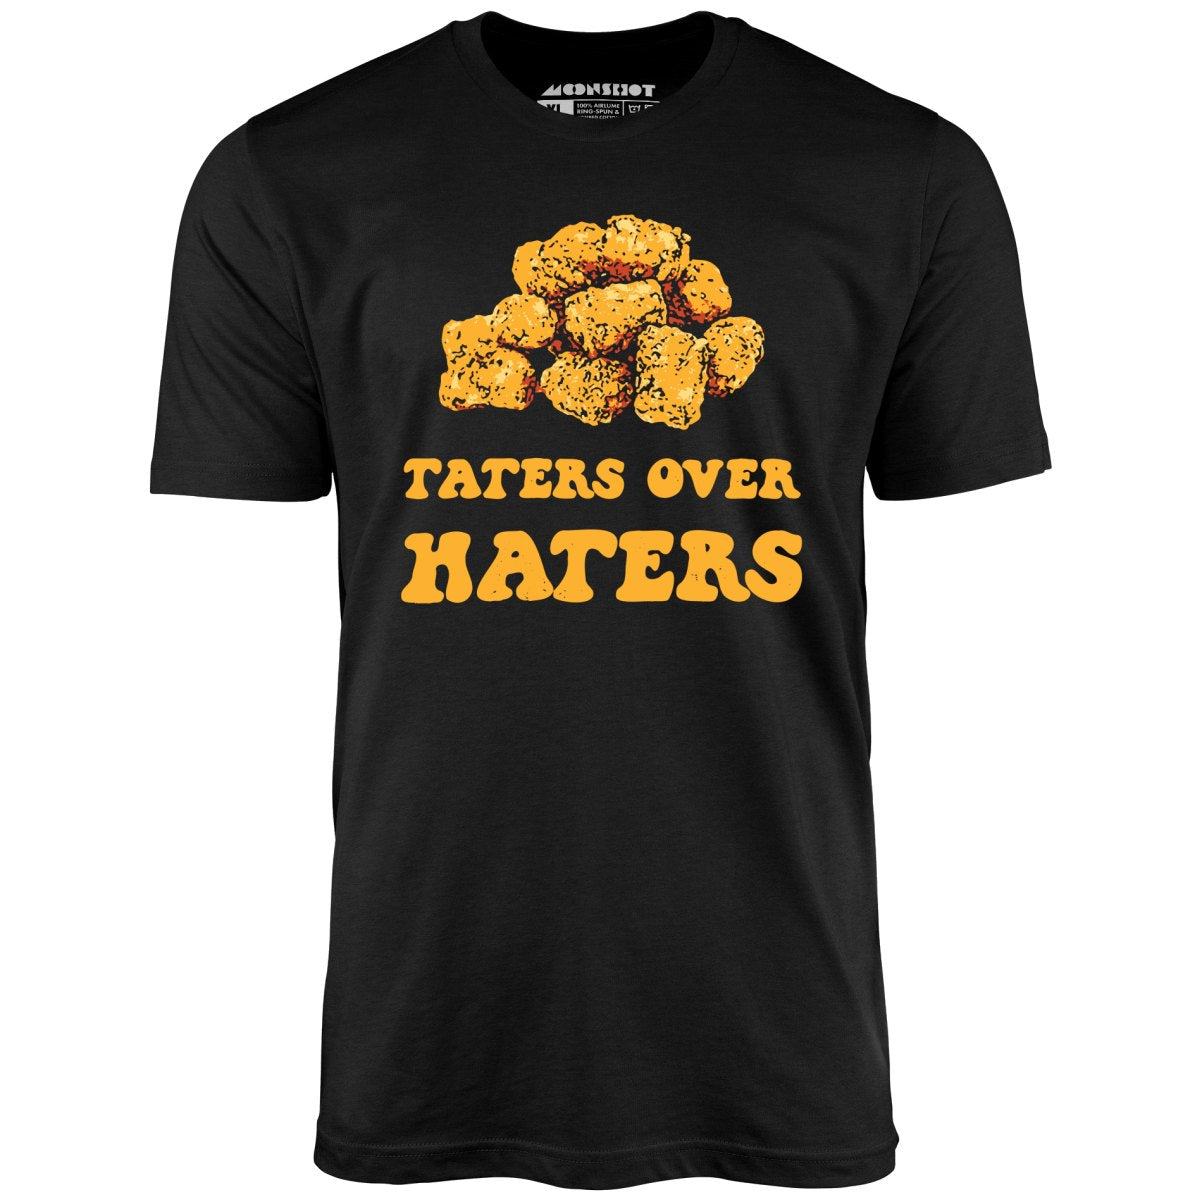 Taters Over Haters - Unisex T-Shirt